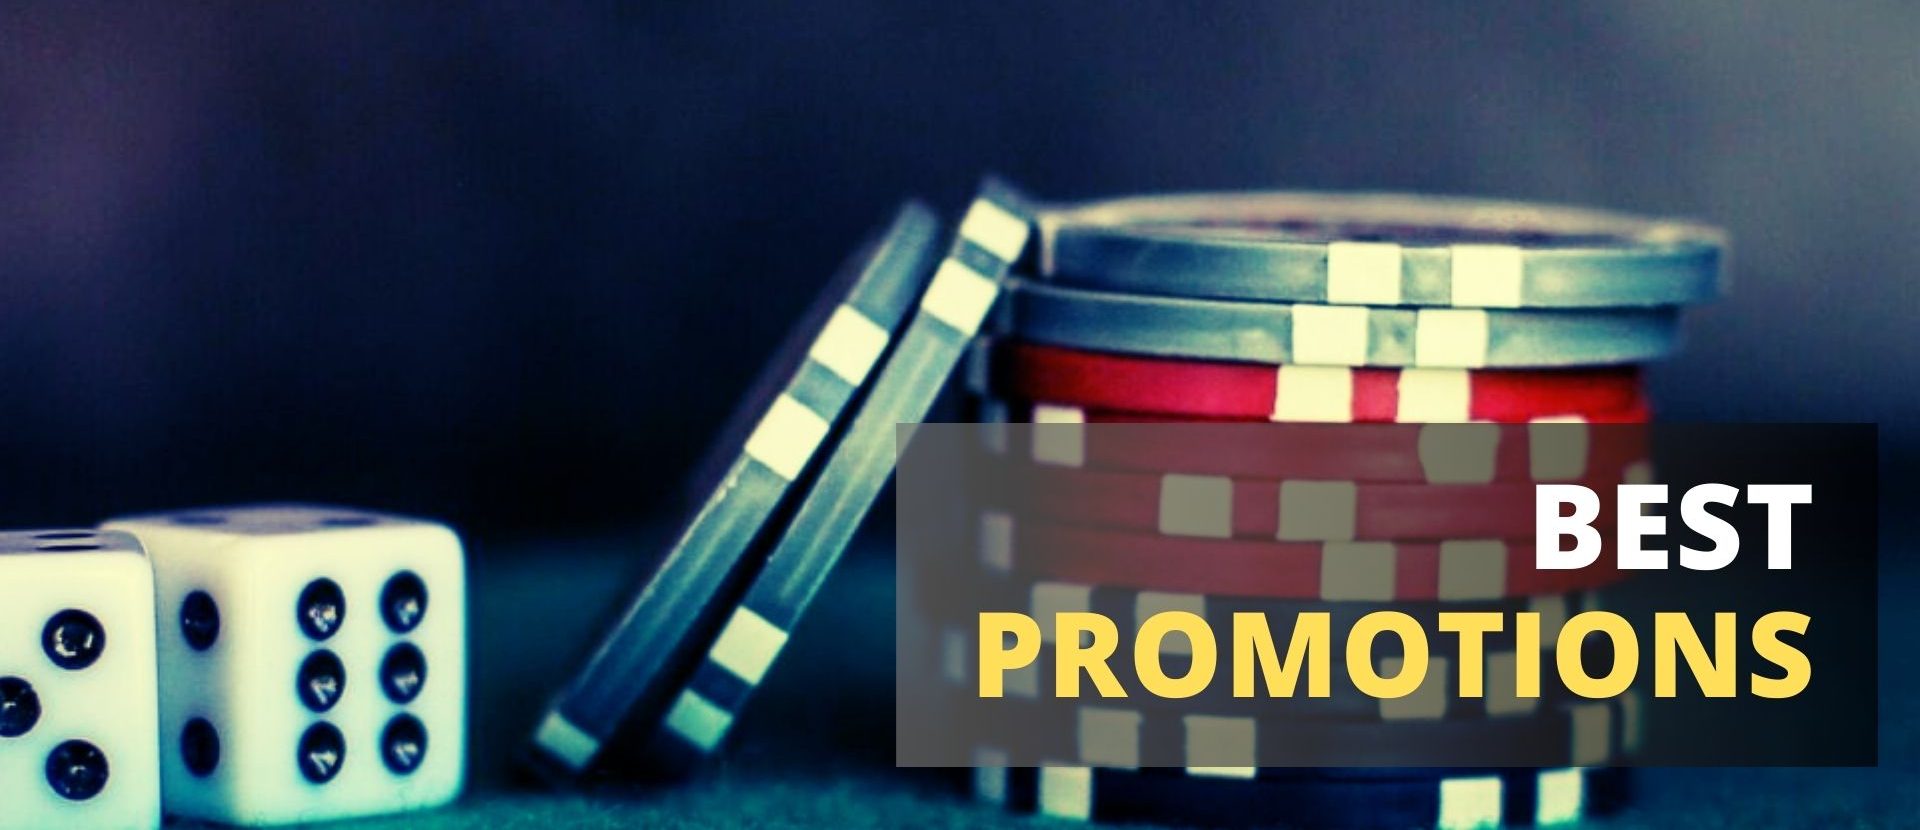 American online casino bonuses and special offers for 2023 